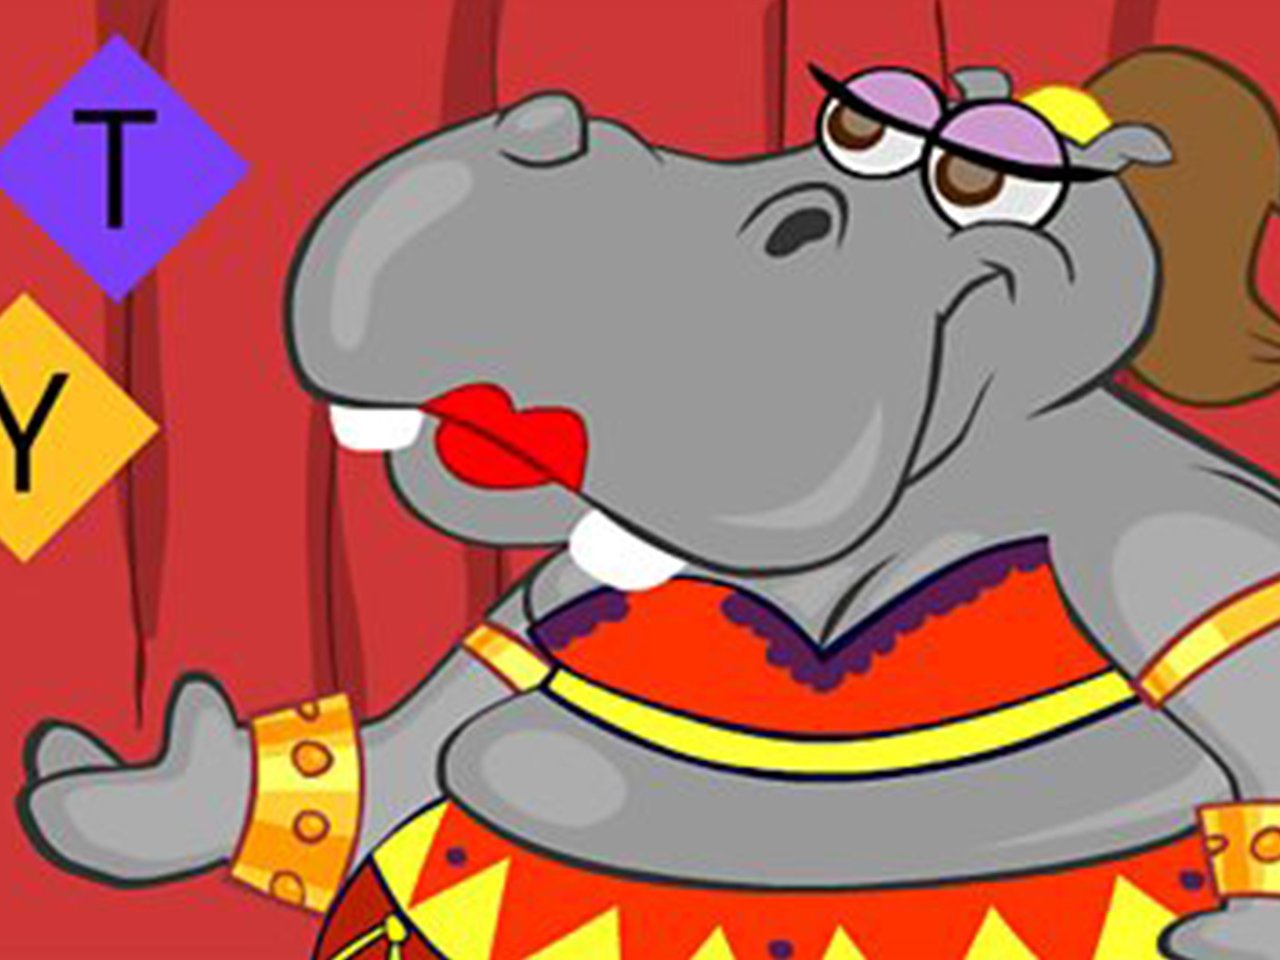 An illustrated elephant from the typing game Dancing Mat Typing